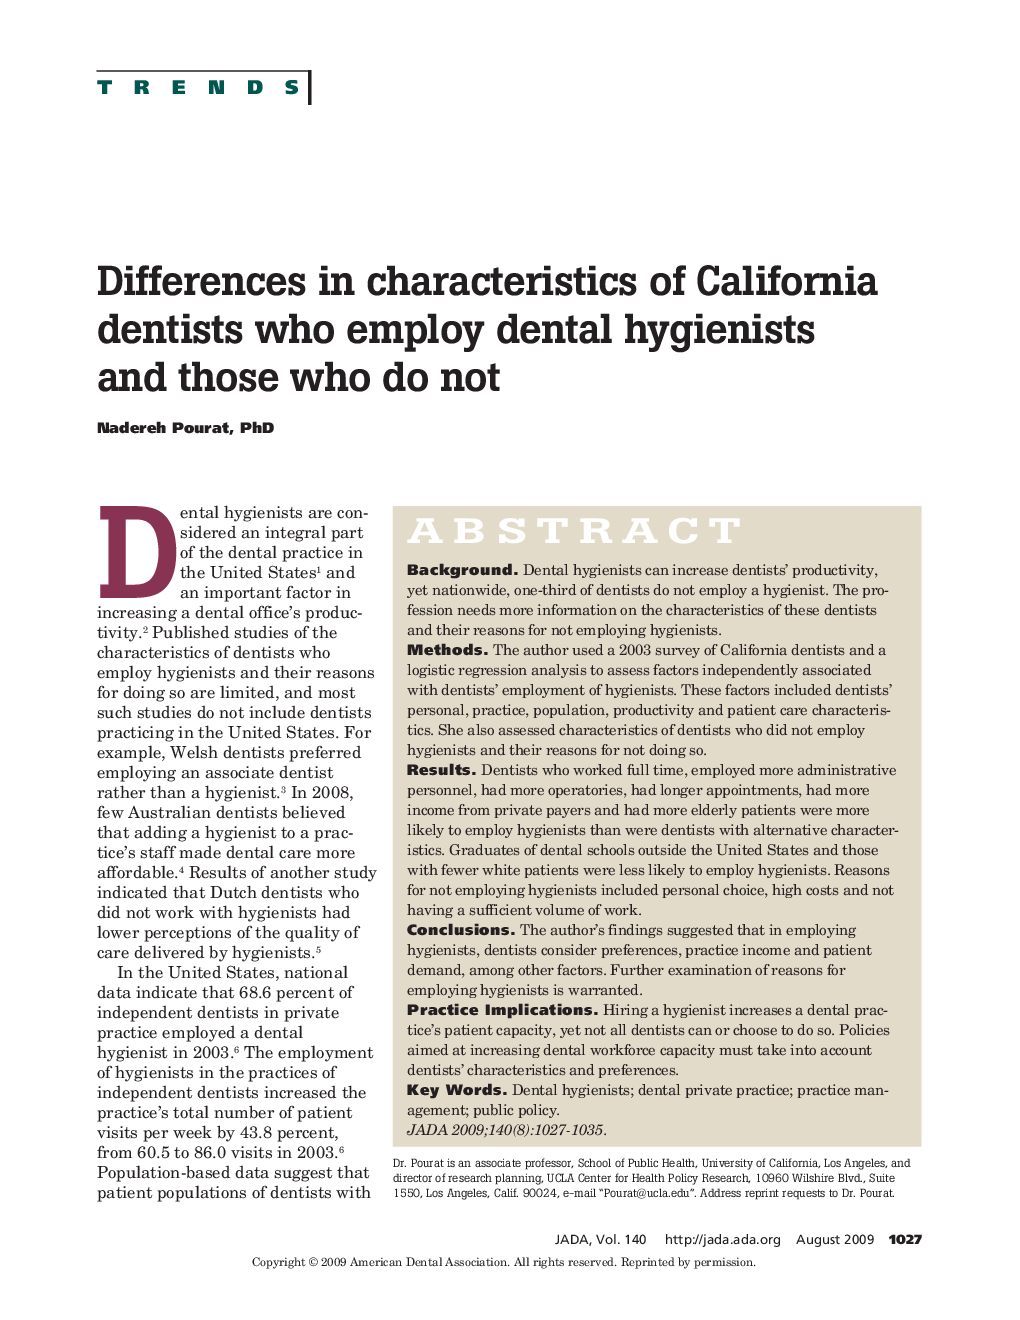 Differences in Characteristics of California Dentists Who Employ Dental Hygienists and Those Who Do Not